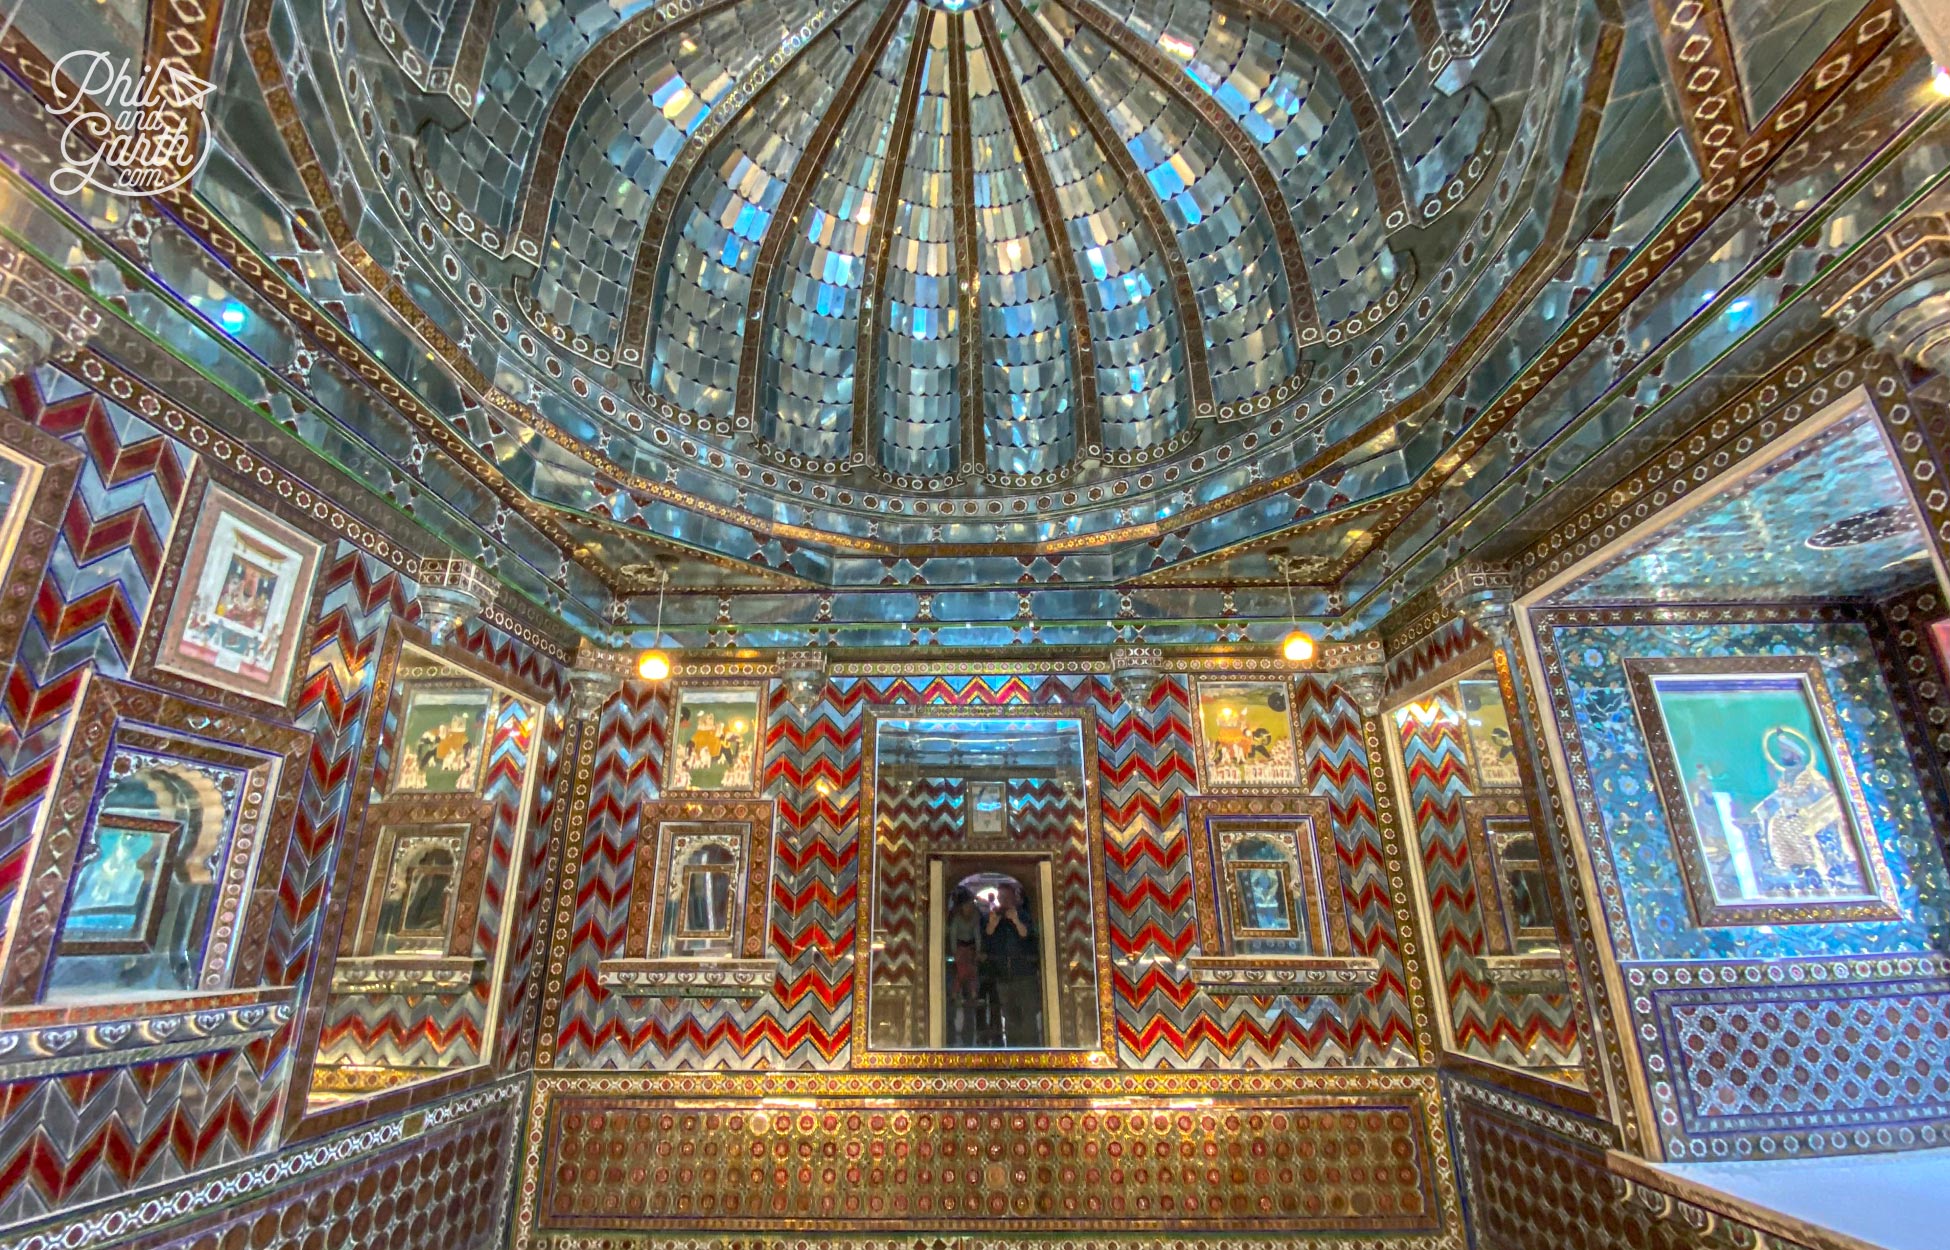 The incredible and opulent Kanch Ki Burj chamber with mosaics of mirror, red and silver glass